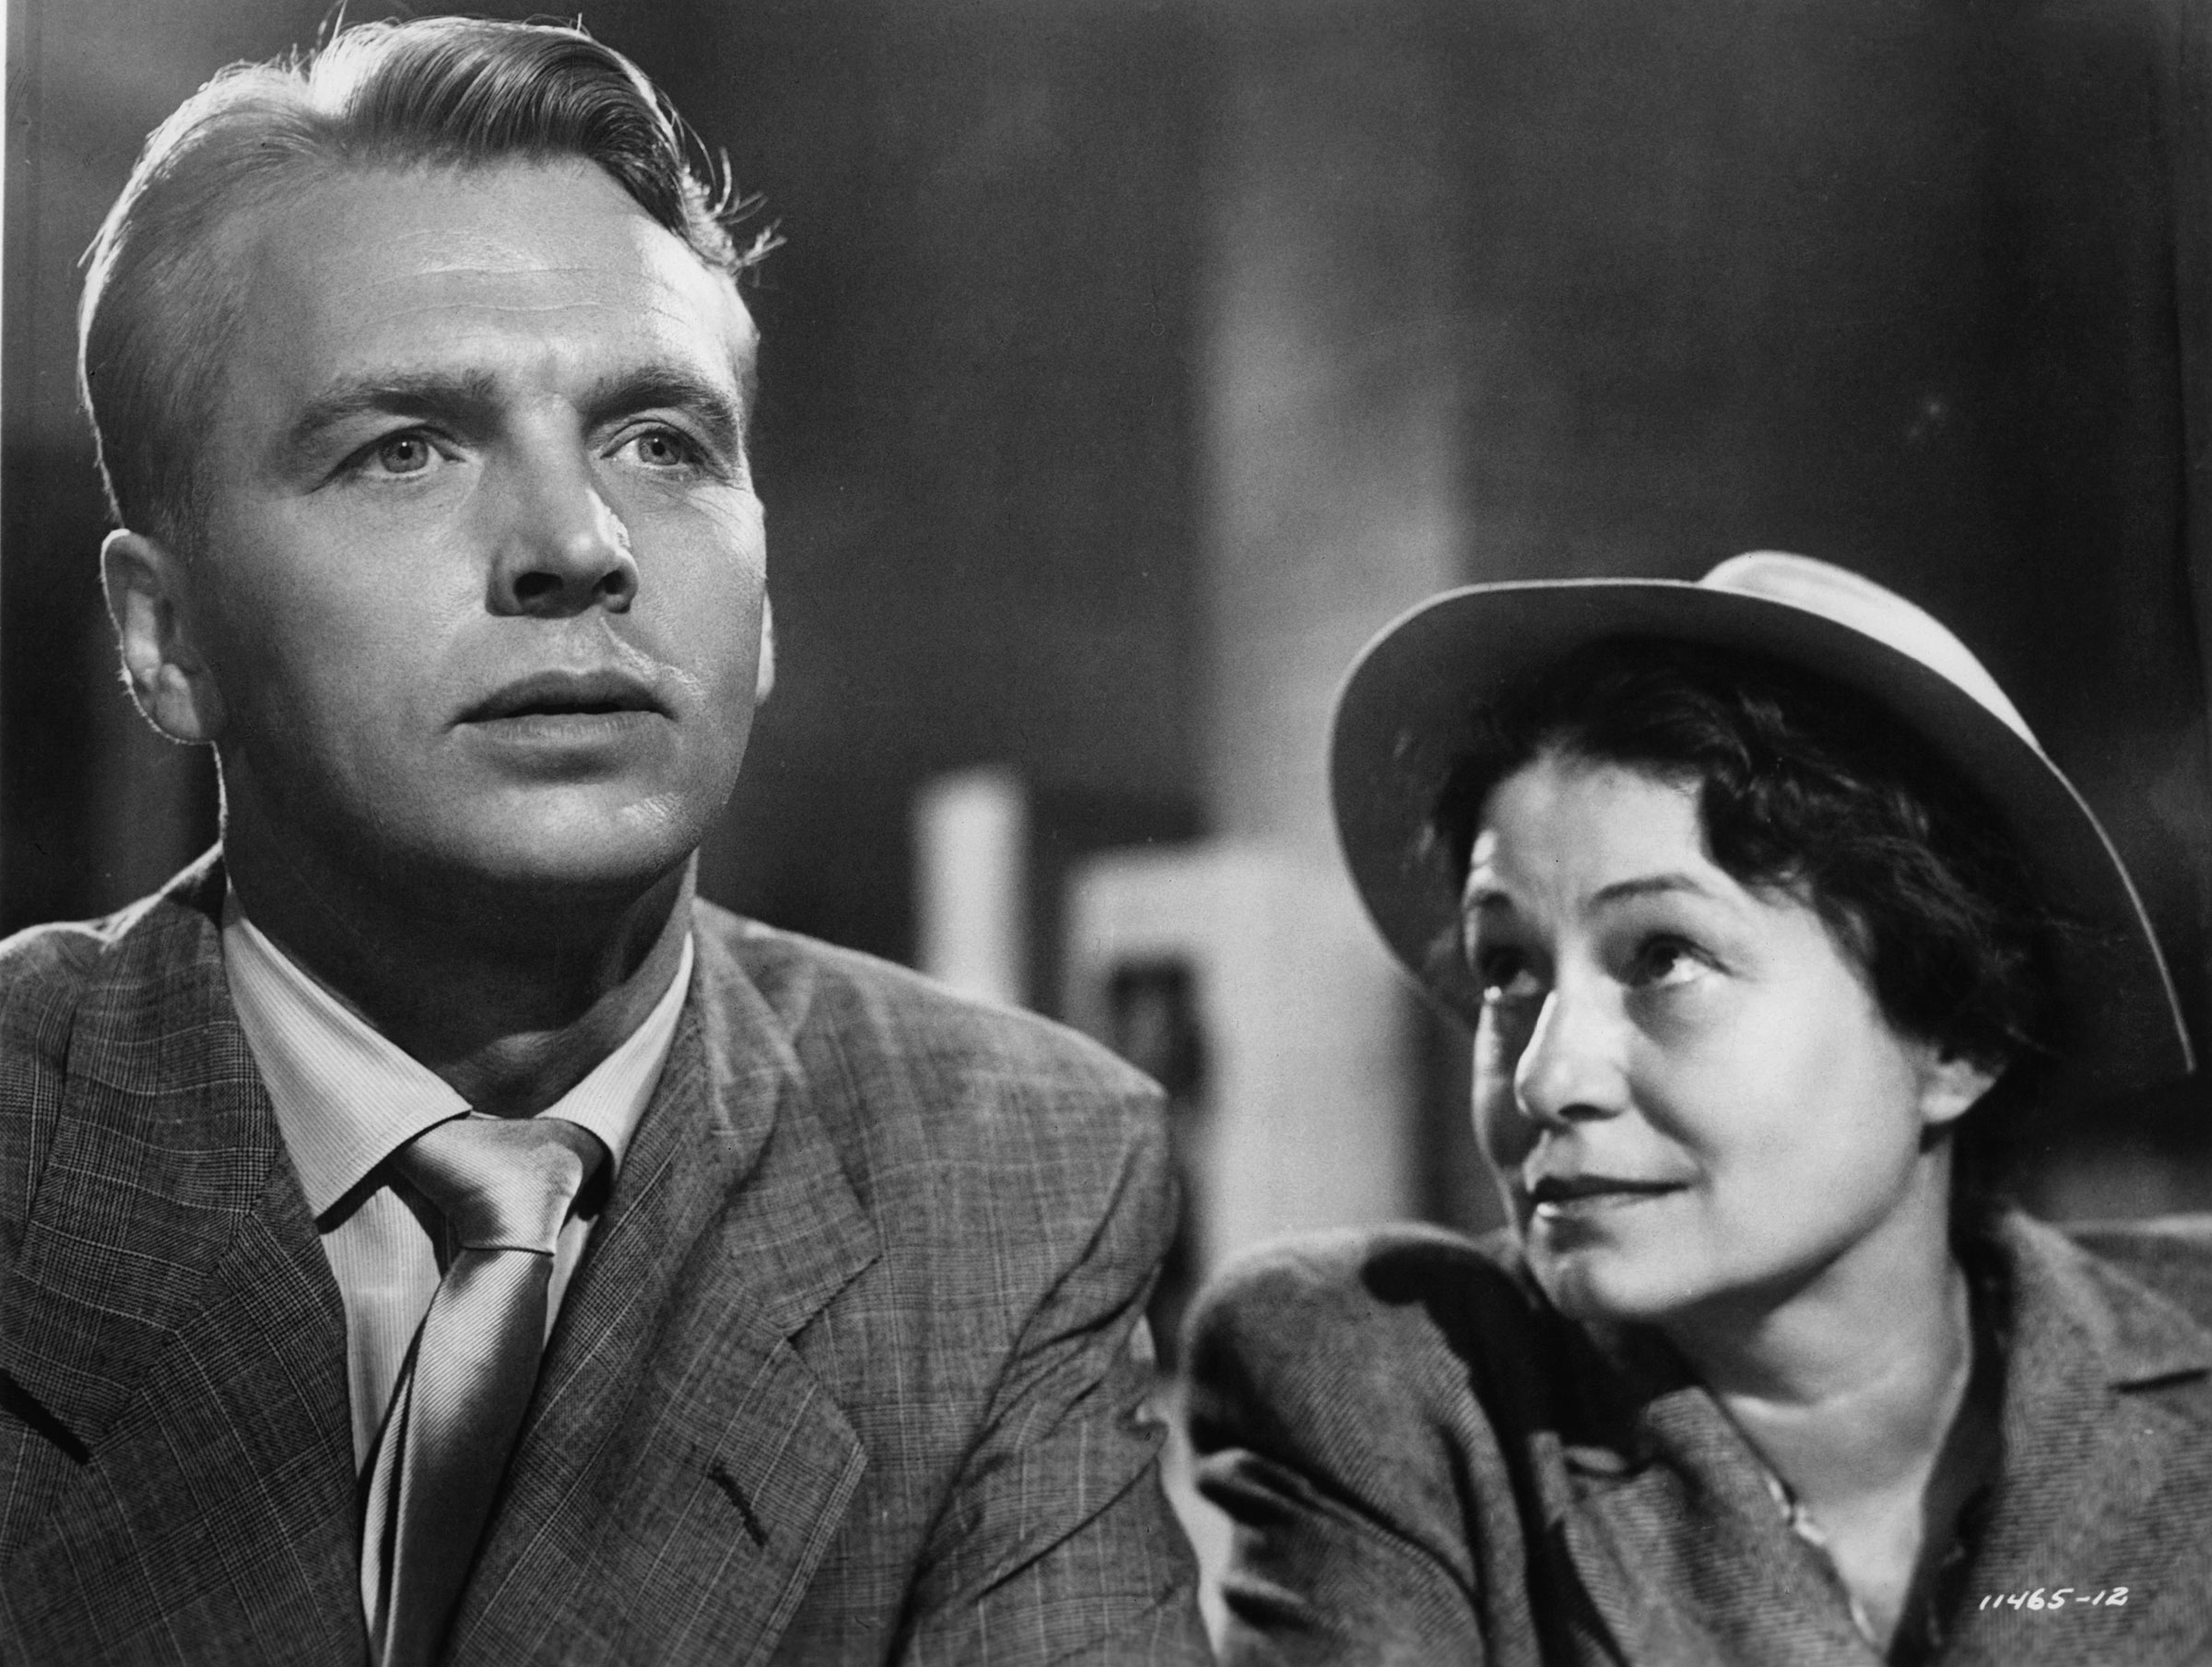 John Lund and Thelma Ritter in a scene from the film 'The Mating Season', 1951